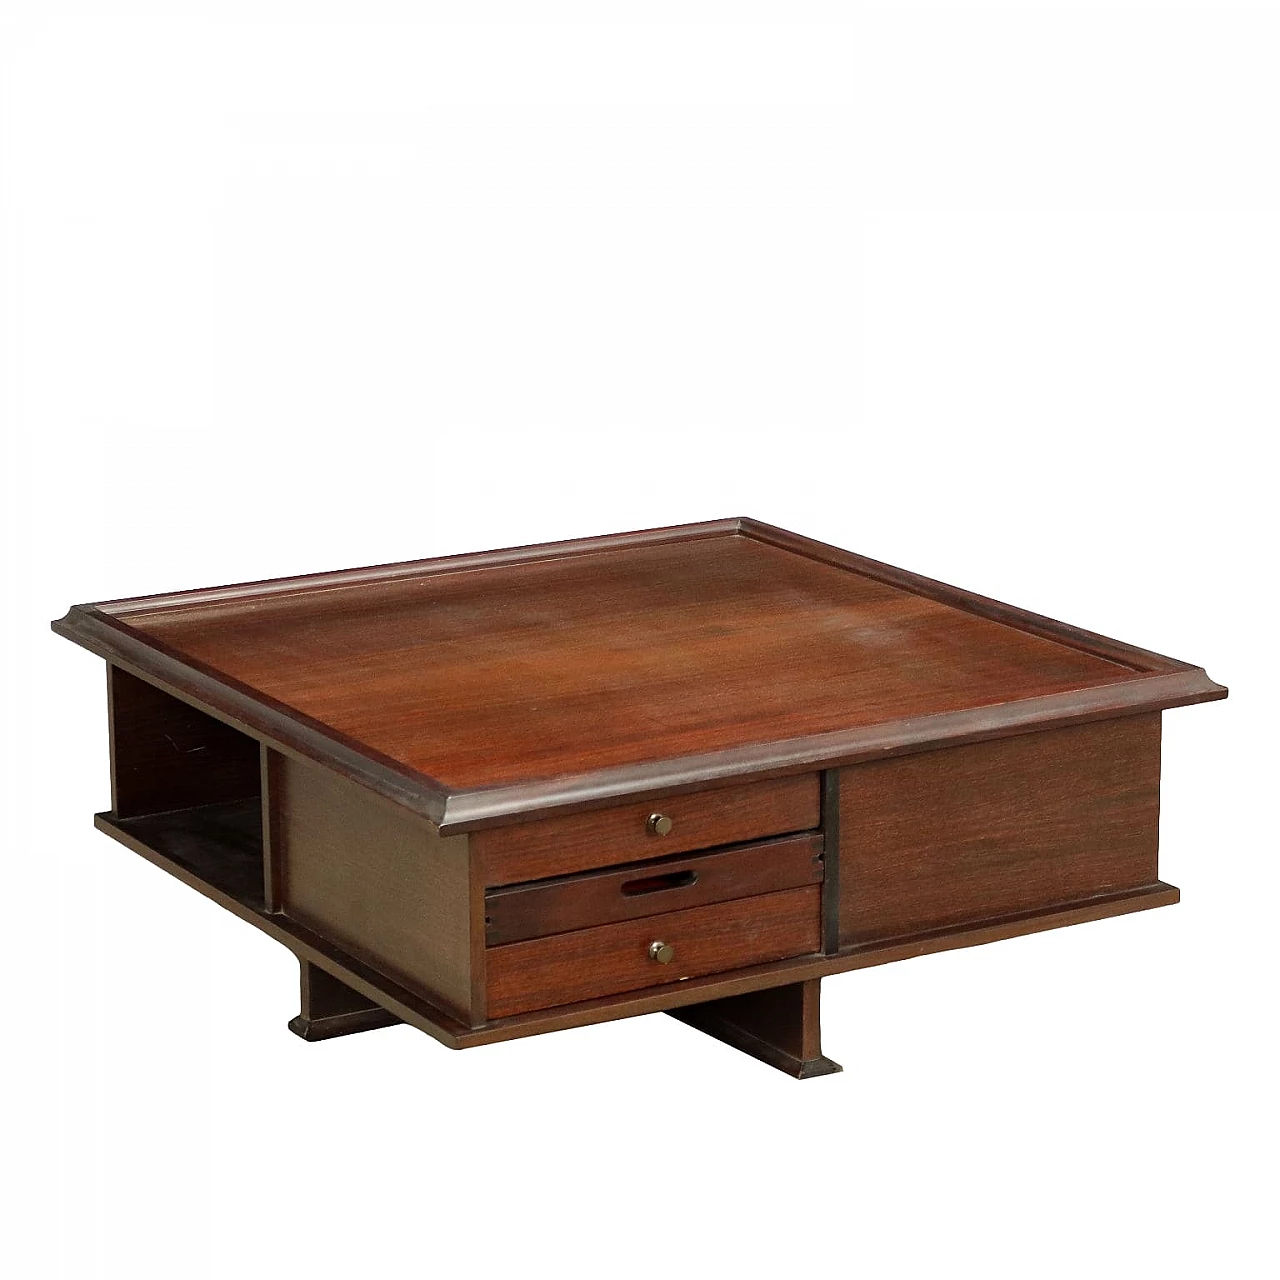 Exotic wood veneered coffee table with open compartments and drawers, 1970s 1